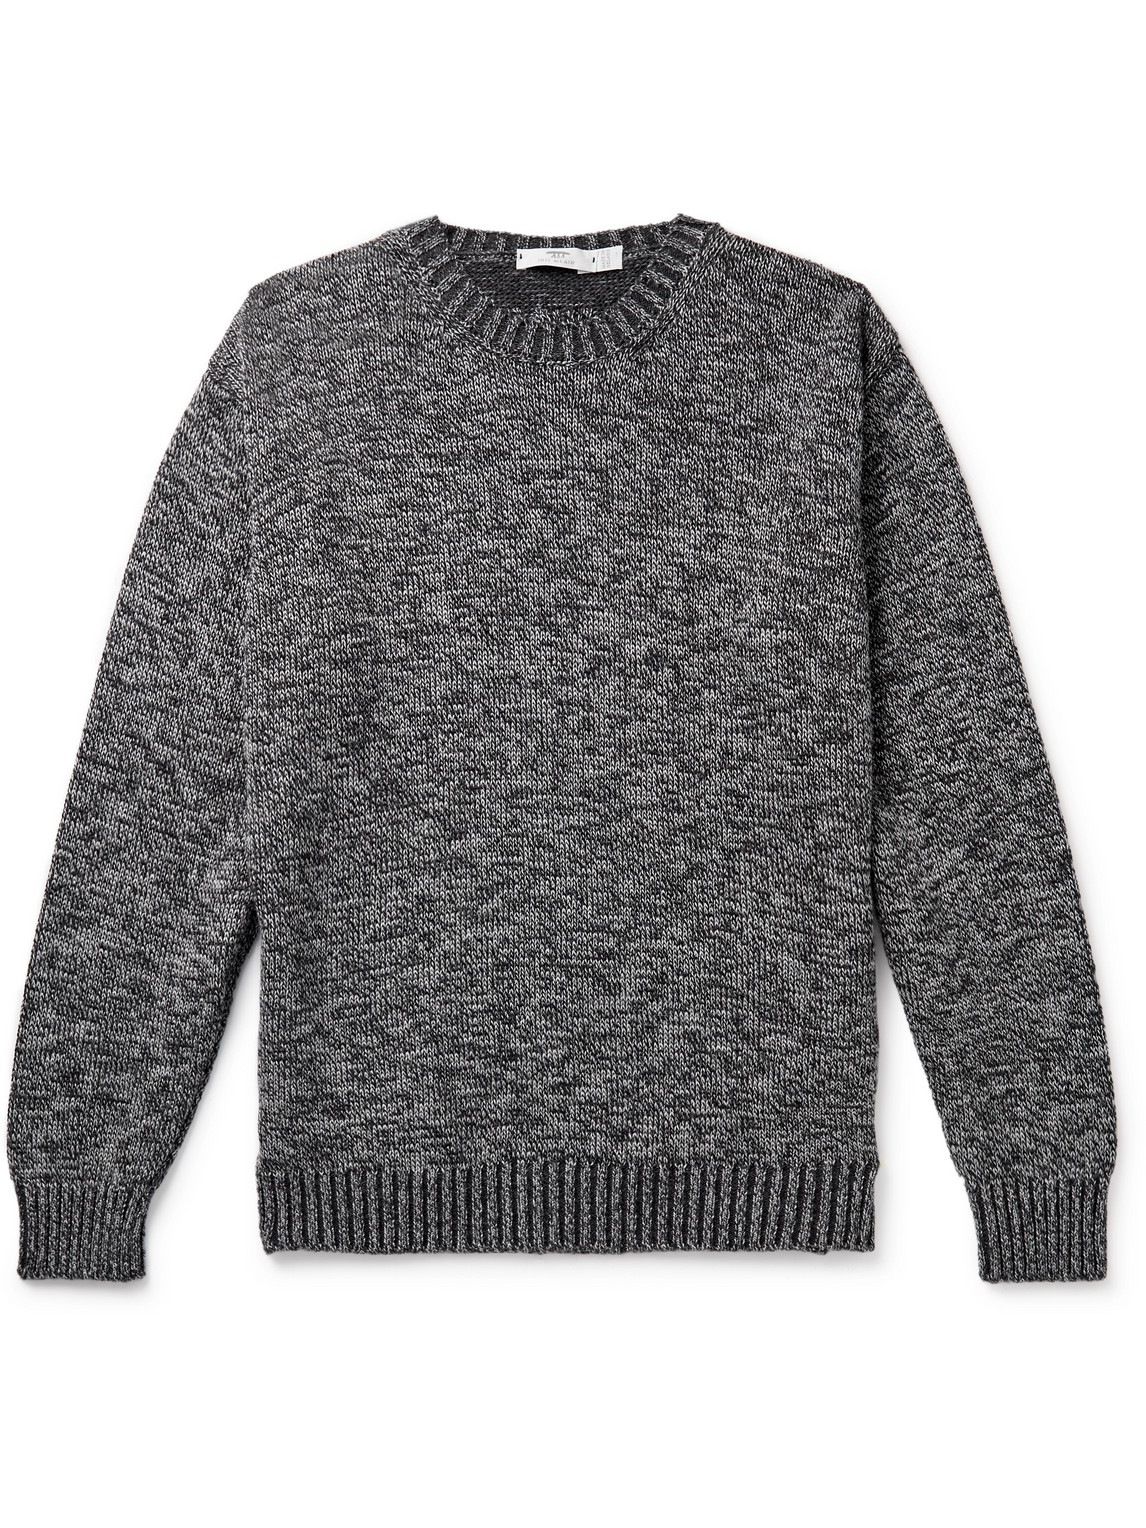 Inis Meain Alpaca, Merino Wool, Cashmere And Silk-blend Sweater In Gray